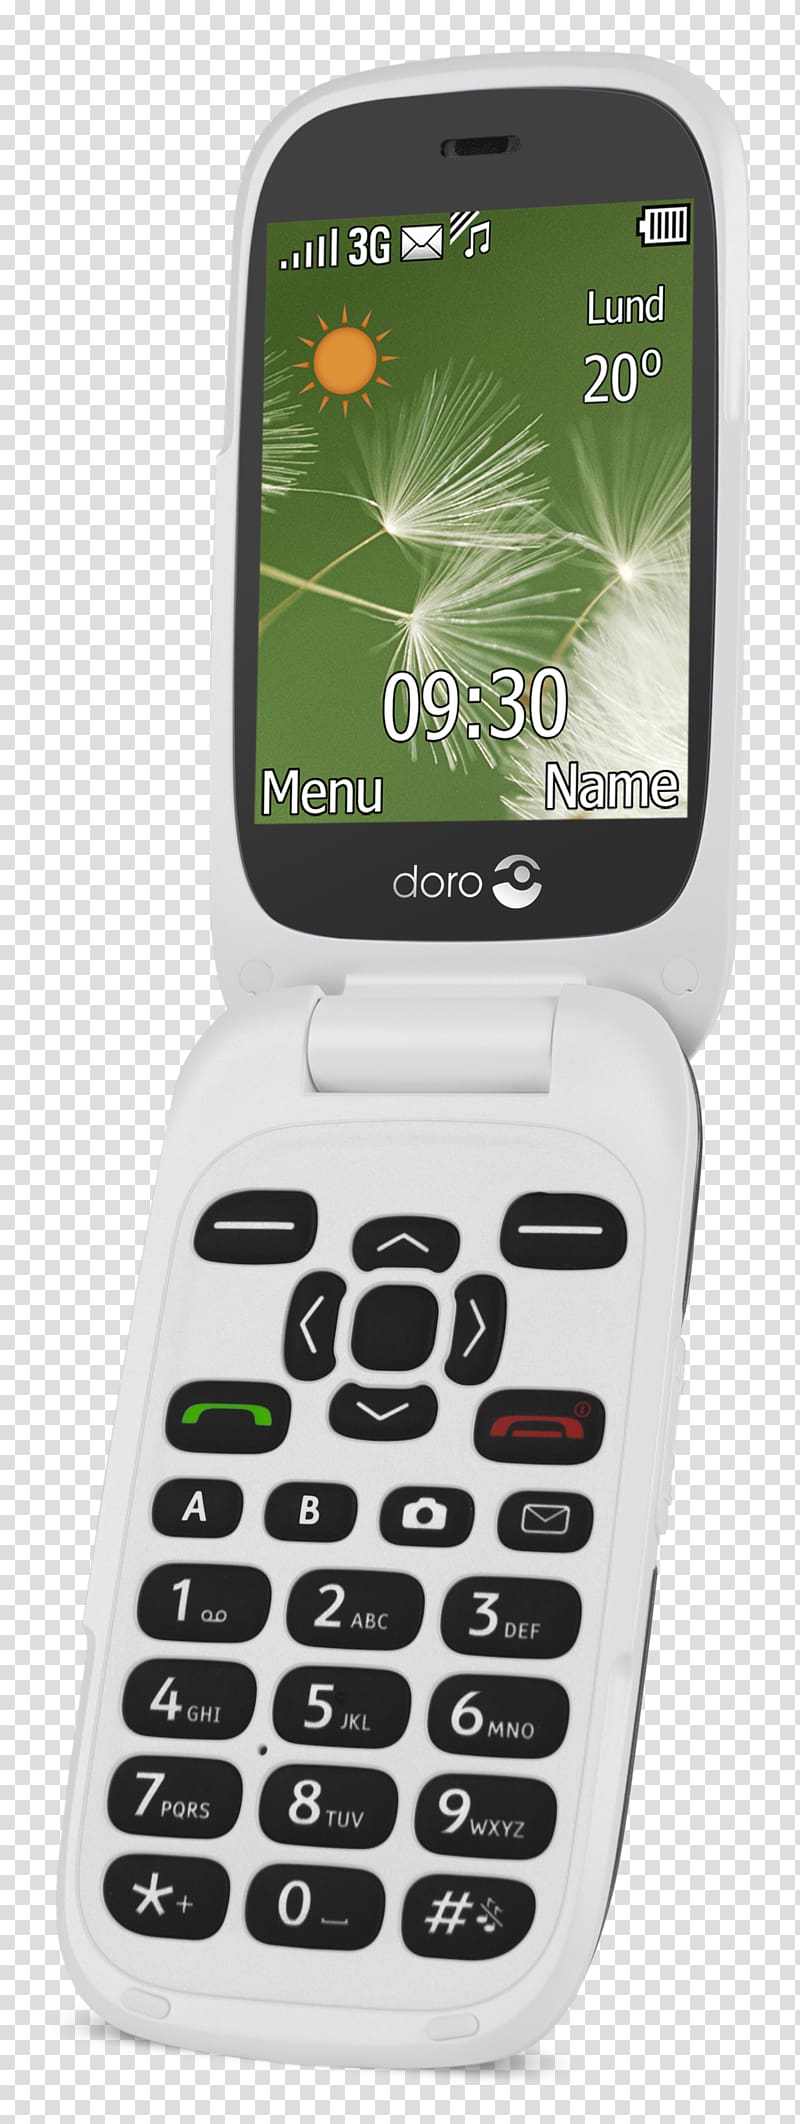 Clamshell design Smartphone Feature phone Doro graphite white, smartphone transparent background PNG clipart